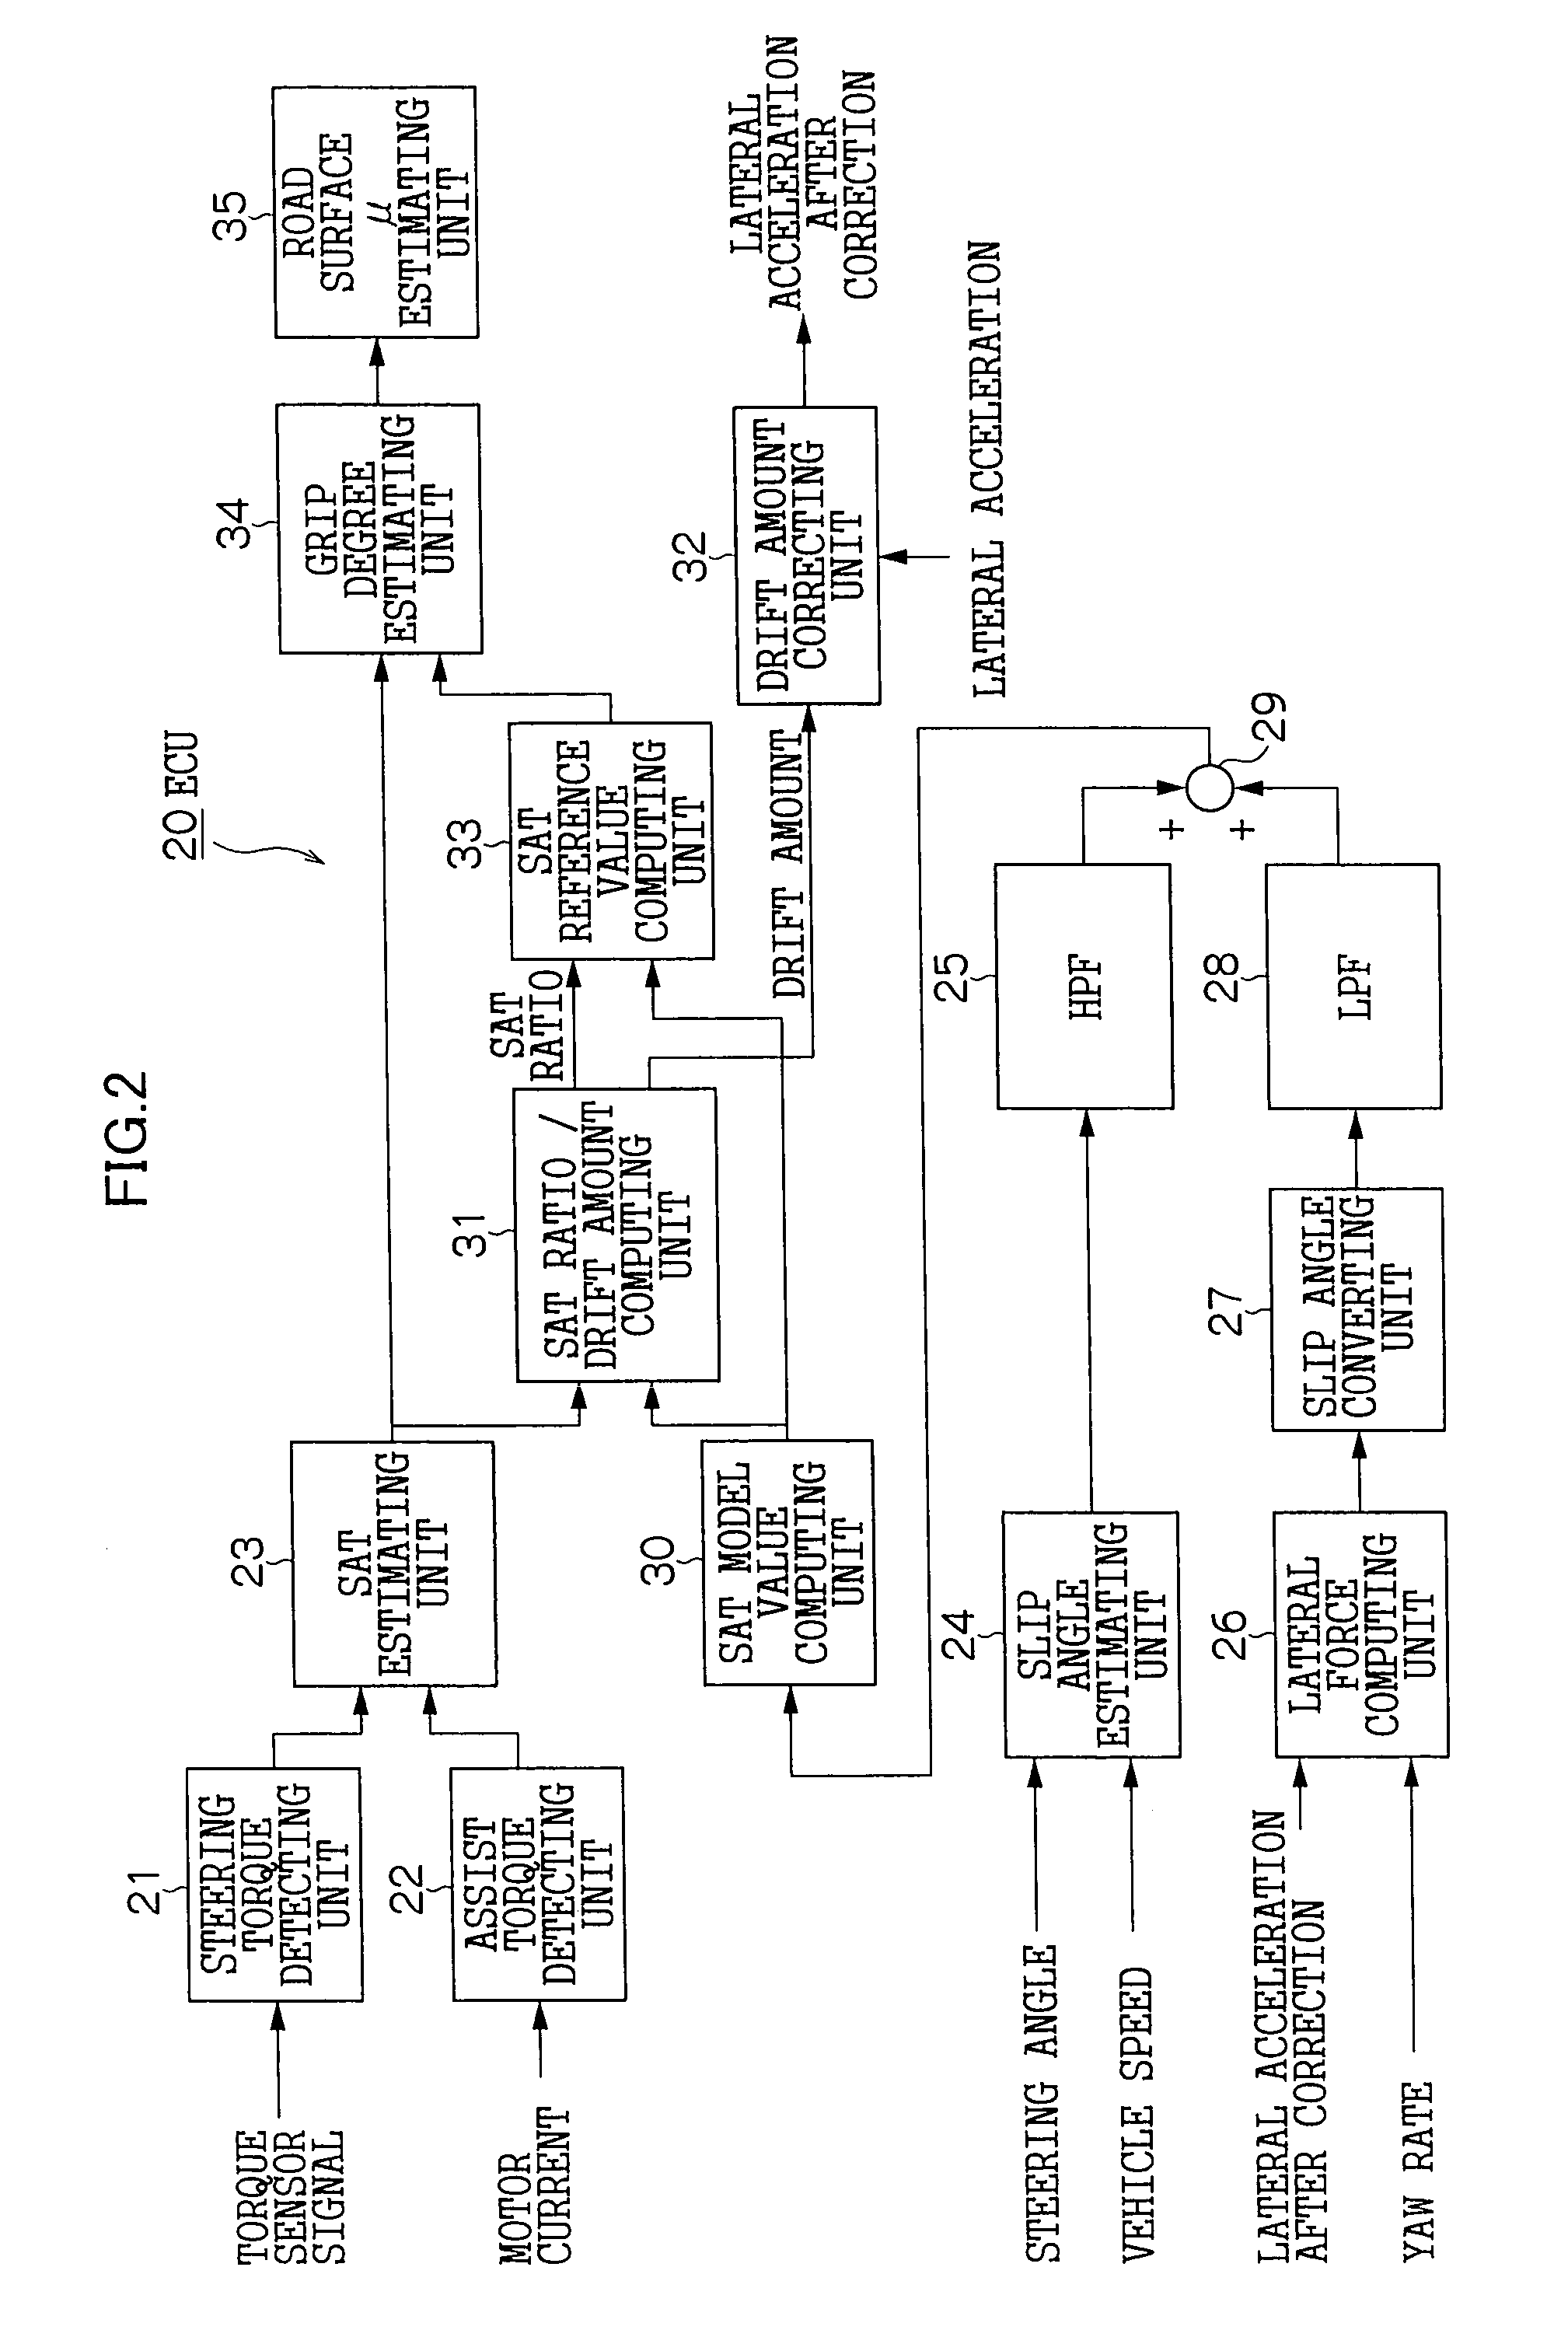 Device for estimating drift amount of lateral acceleration sensor, device for correcting output of lateral acceleration sensor, and device for estimating road surface friction state